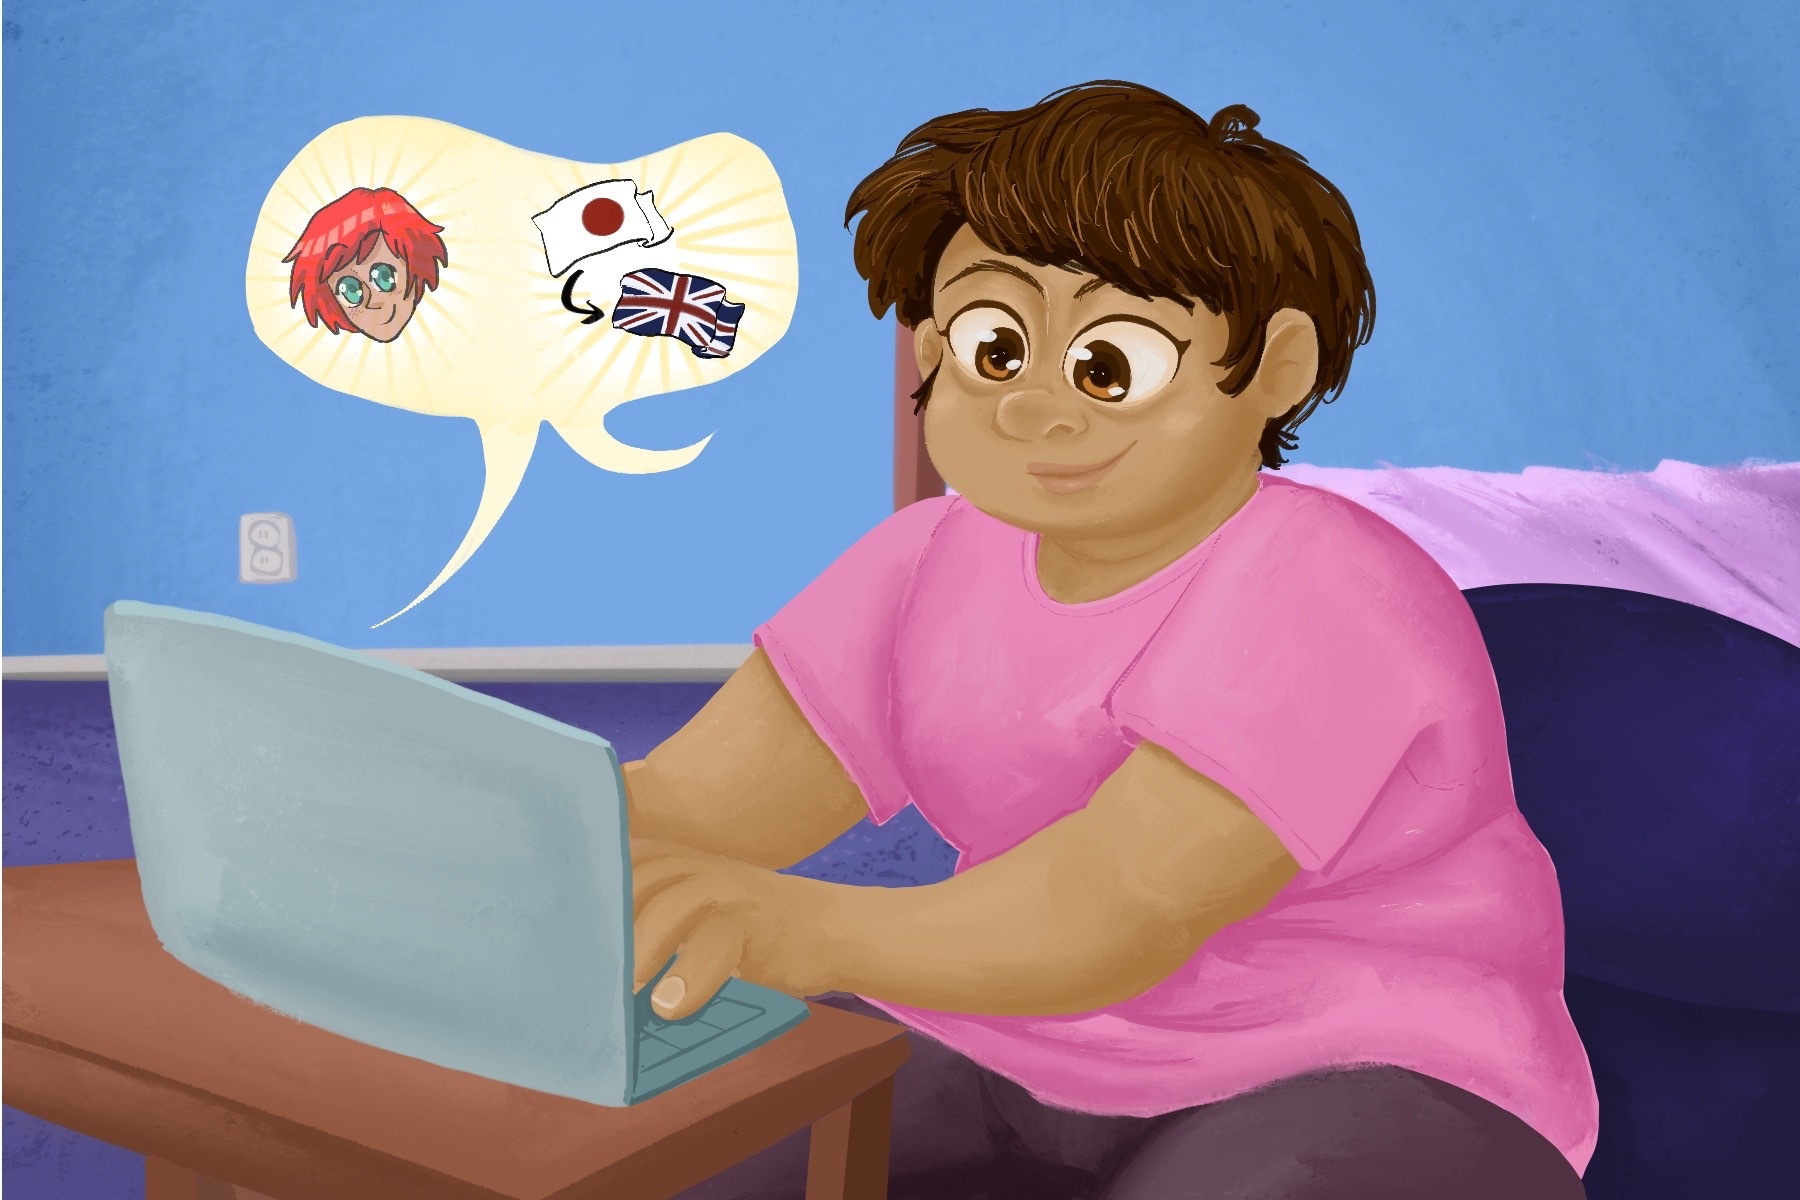 An illustration of a computer user engaging in playbor